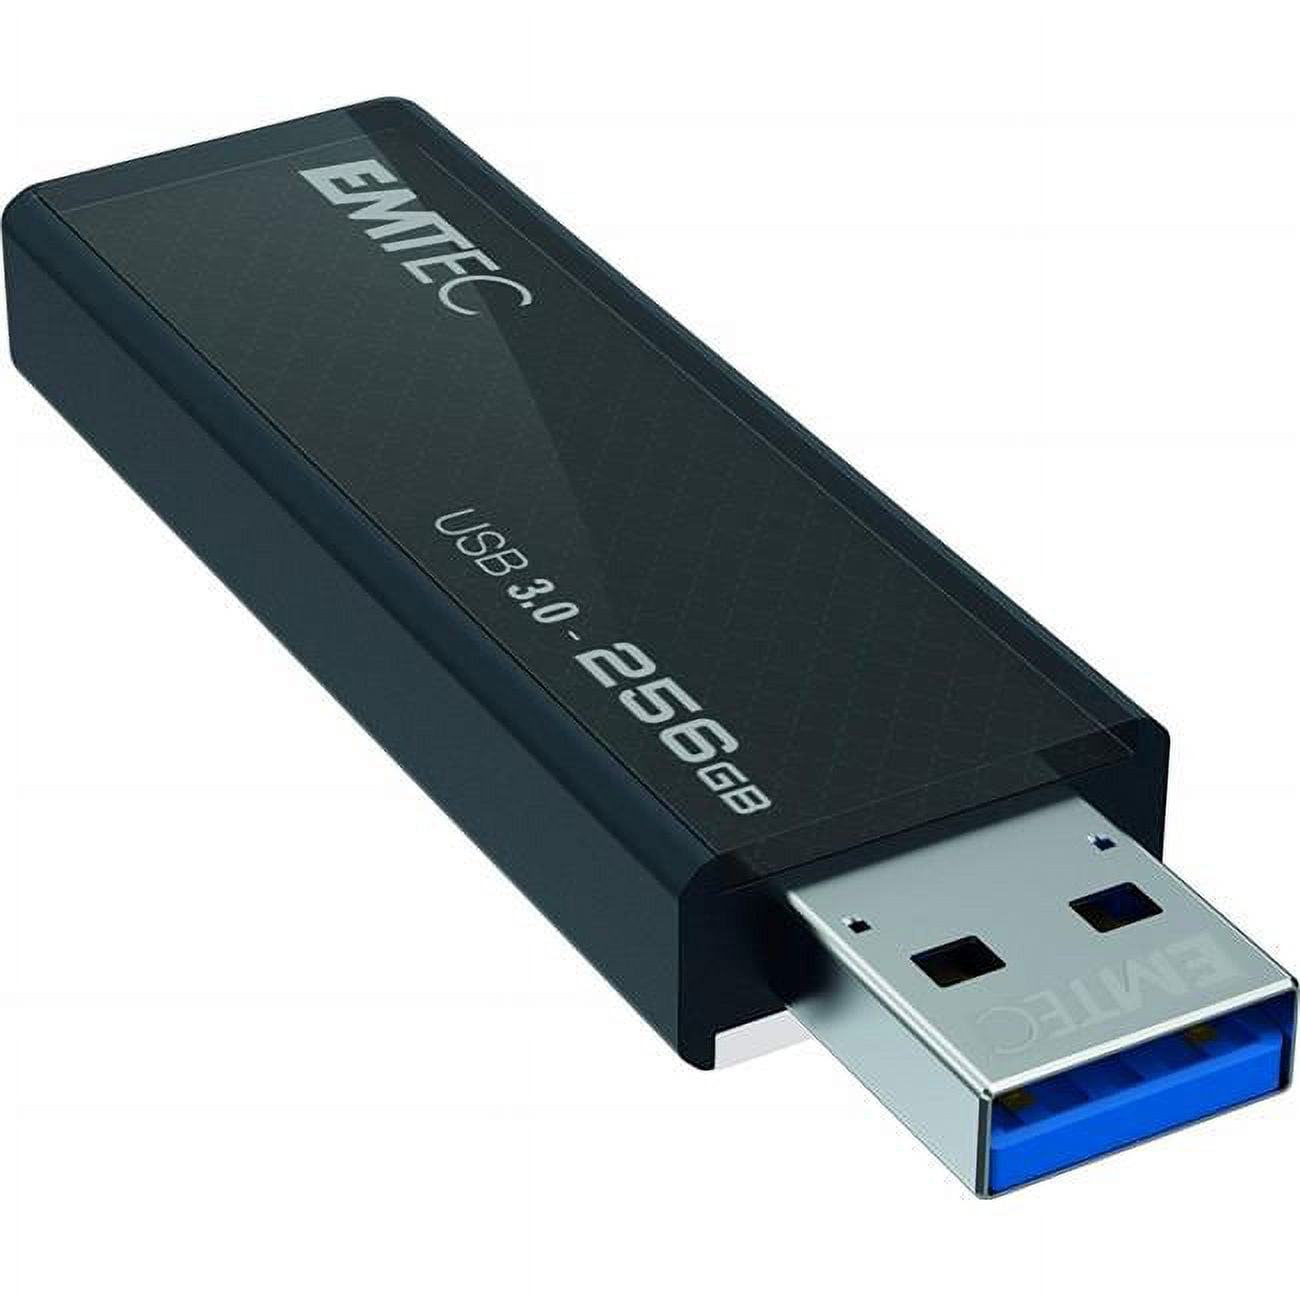 Picture of Emtec ECMMD256GS600 256 GB USB 3.0 Speeding Up to 400 MBs Flash Drive